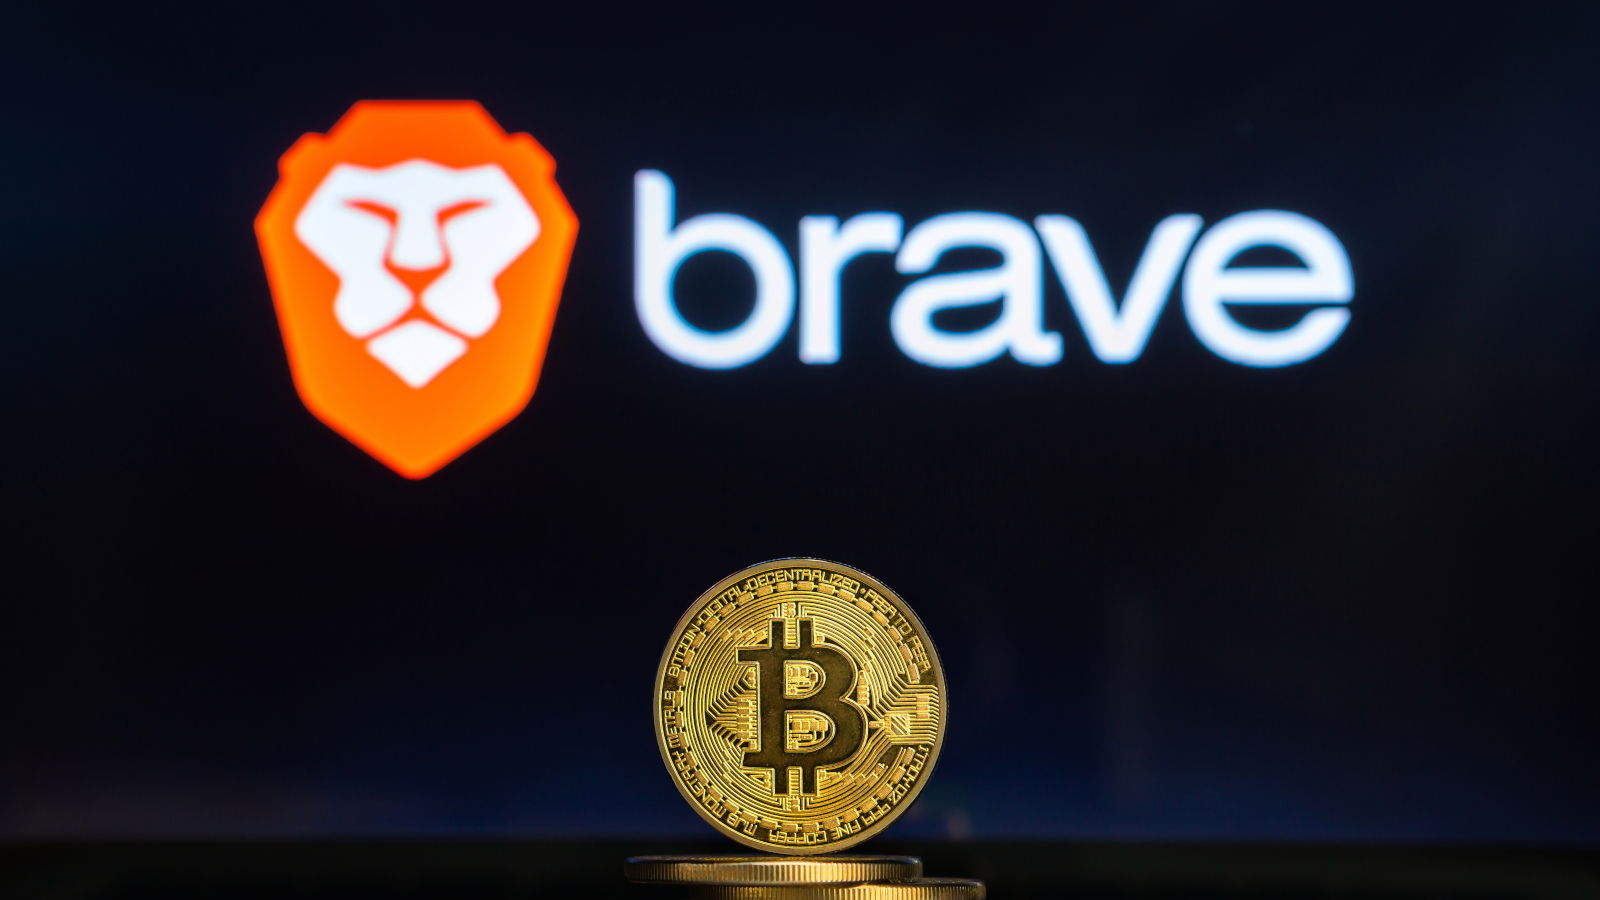 brave crypto currency